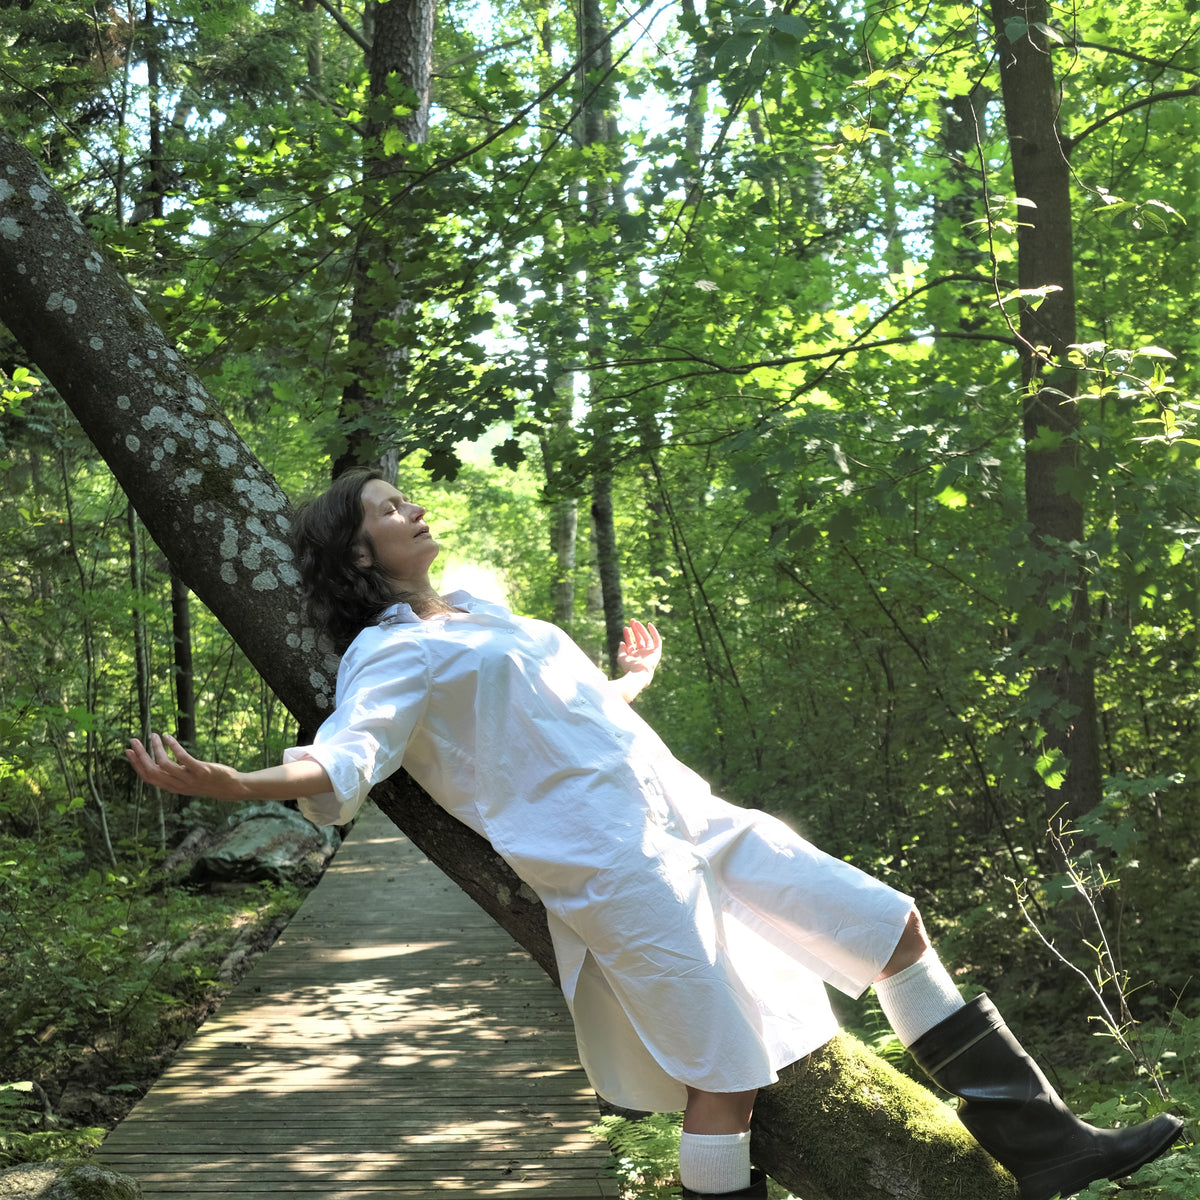 Forest Bathing Benefits  How Shinrin-Yoku Can Sooth Your Body & Mind